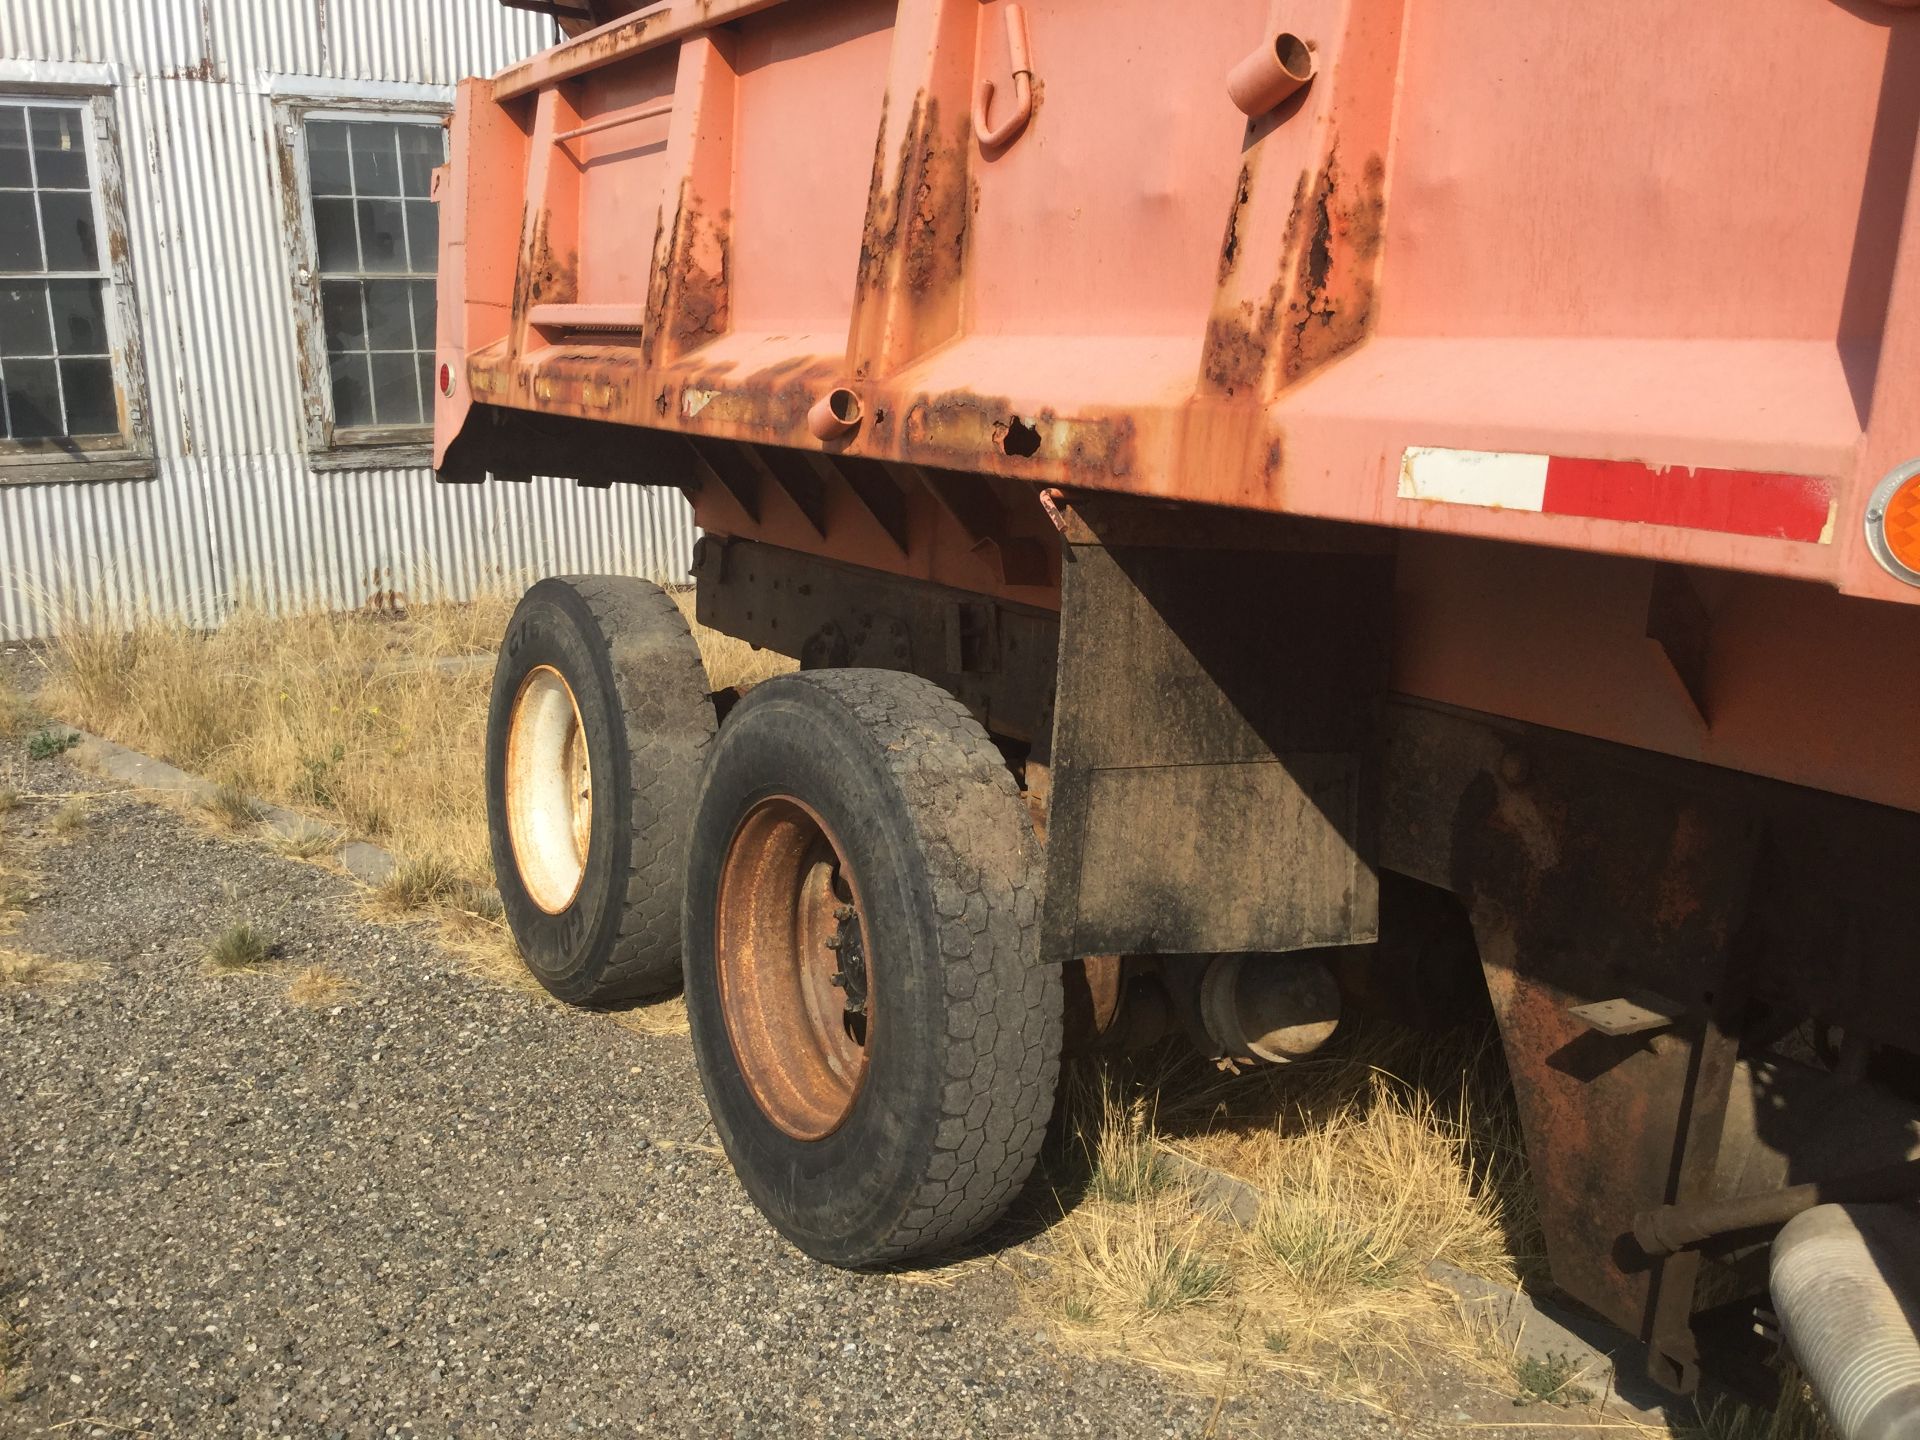 Year: 1992 Make: Ford Model: L9000 Type: Dump Truck Vin#: A33754 Mileage/Hours: 345000 10L - Image 4 of 7